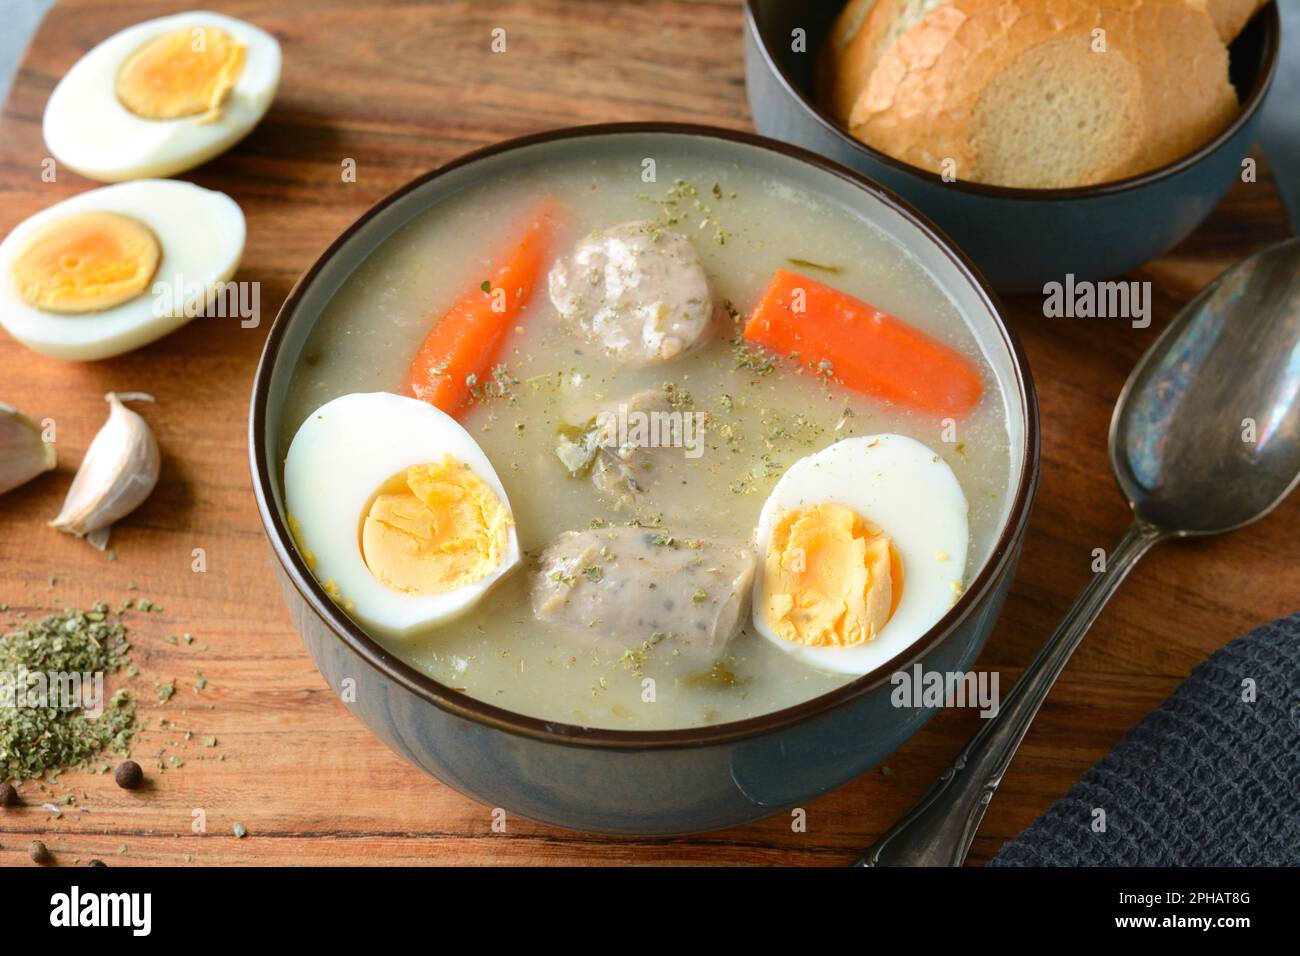 The sour soup (zurek) made of rye flour with sausage and egg. Popular Easter dish Stock Photo